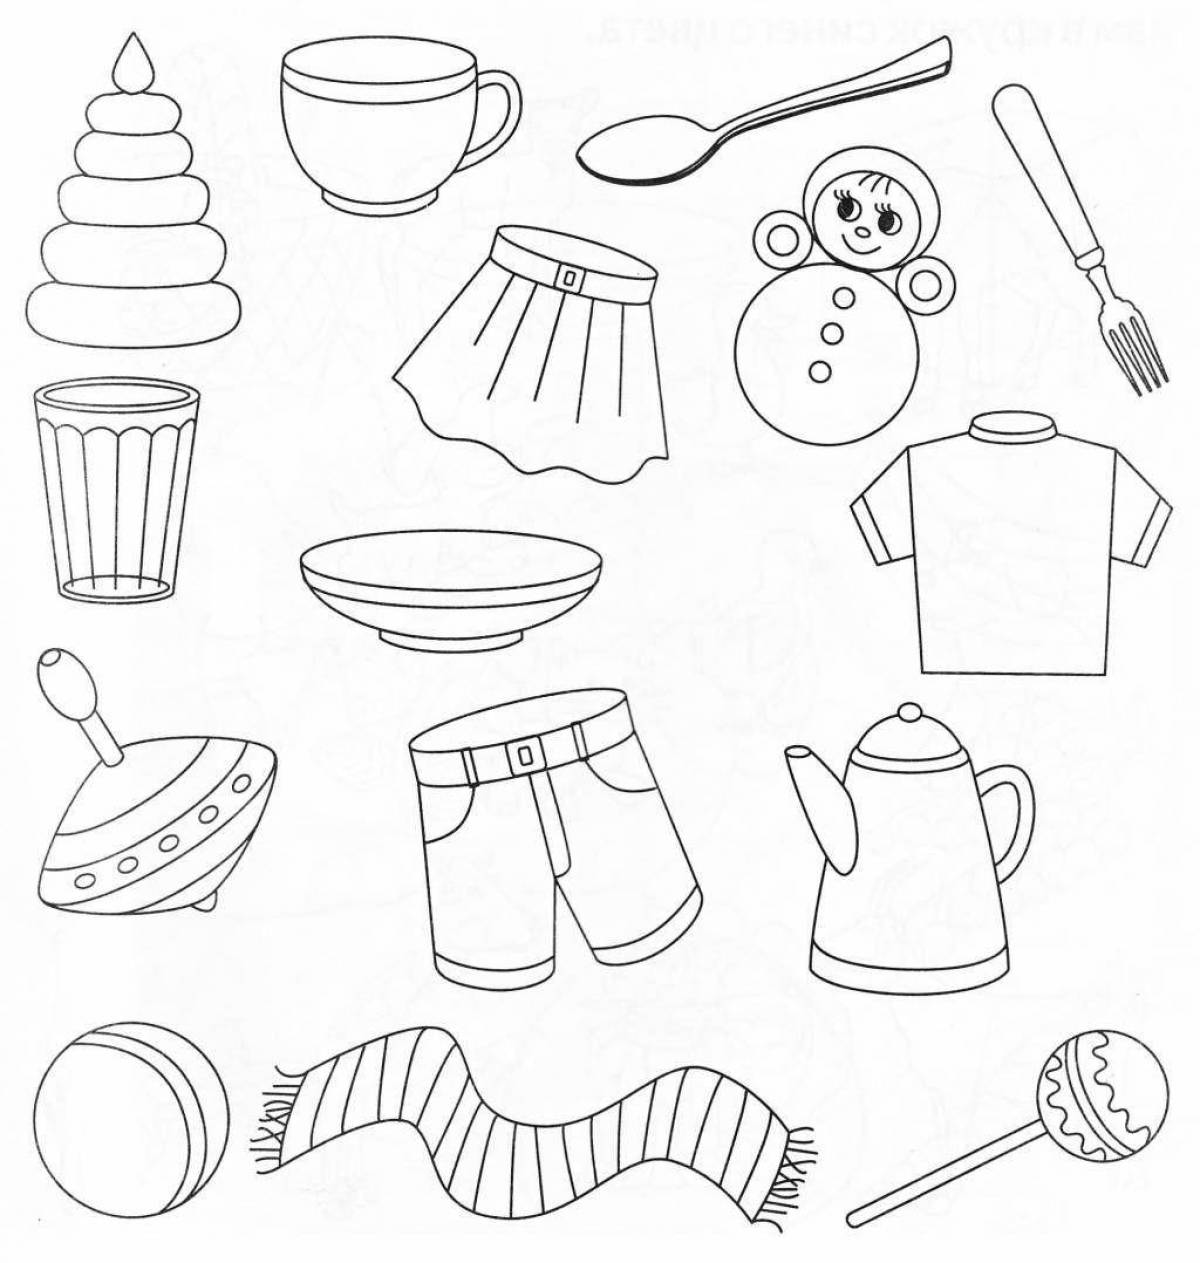 Coloring pages for preschool children